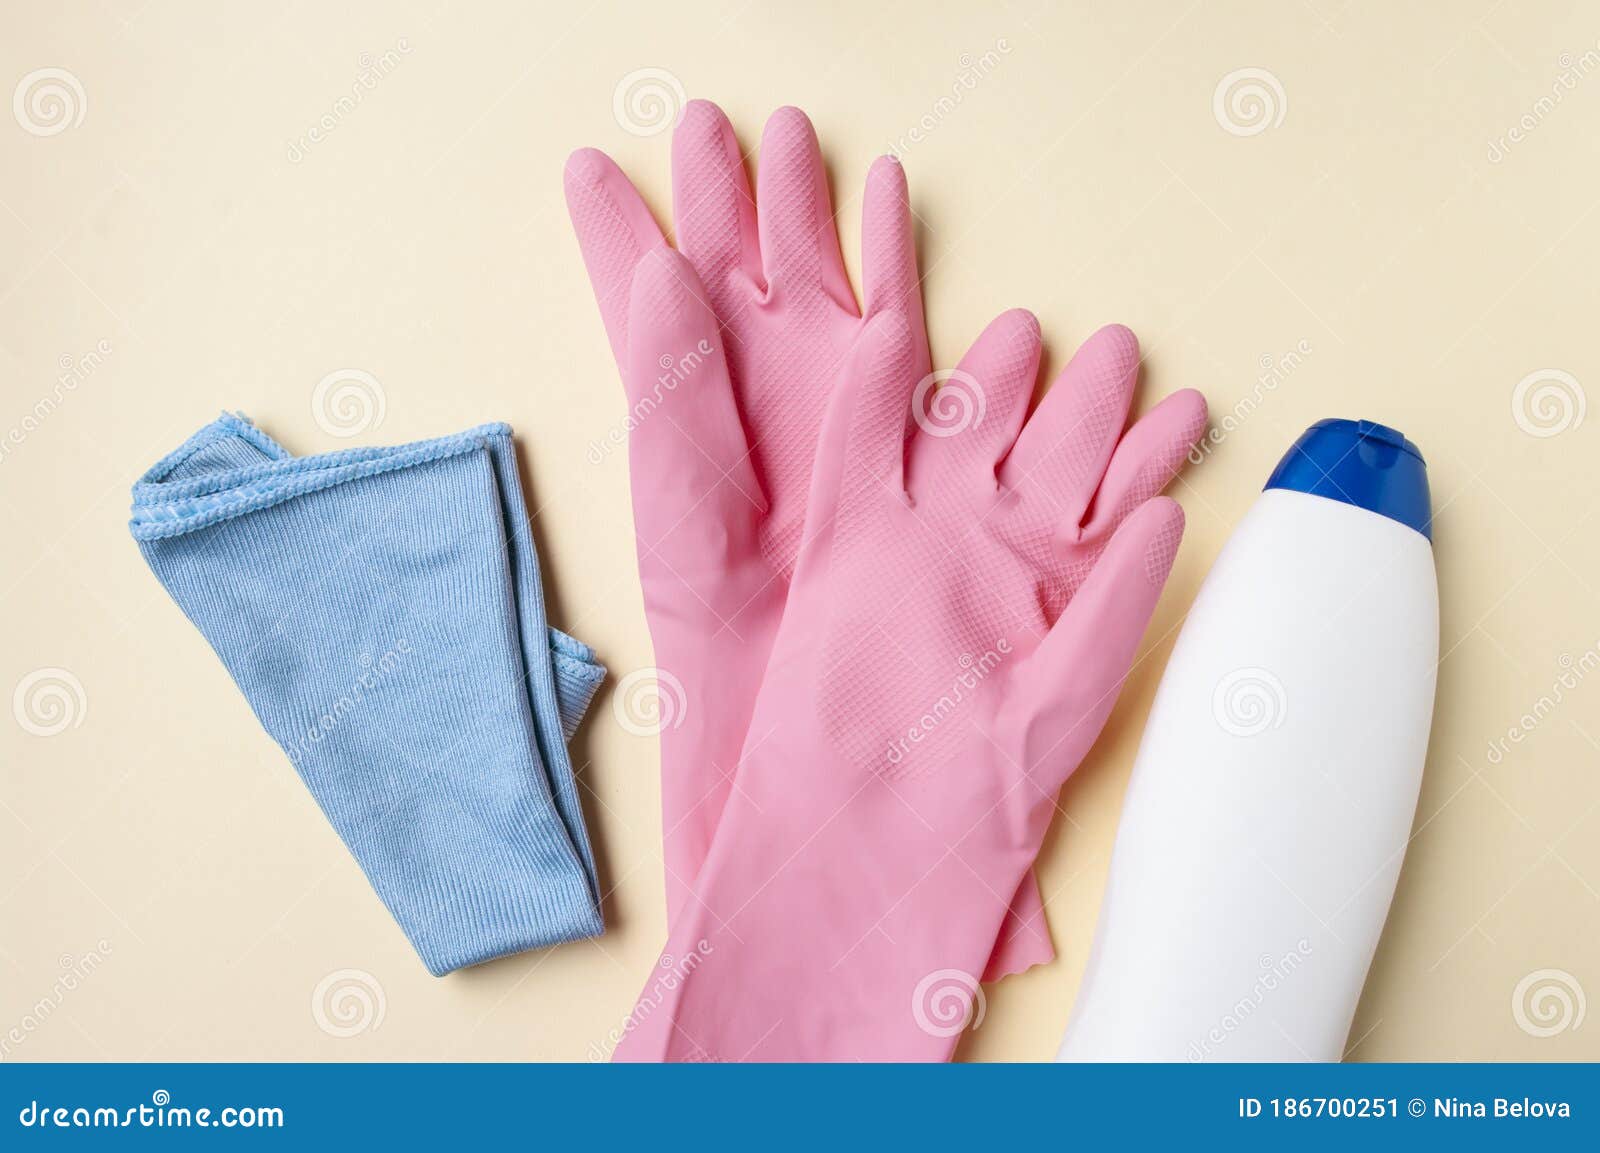 Bathroom Cleaning Tools, Detergent, Rubber Gloves, Fabric. Housekeeping.  Stock Image - Image of clear, pink: 186700251